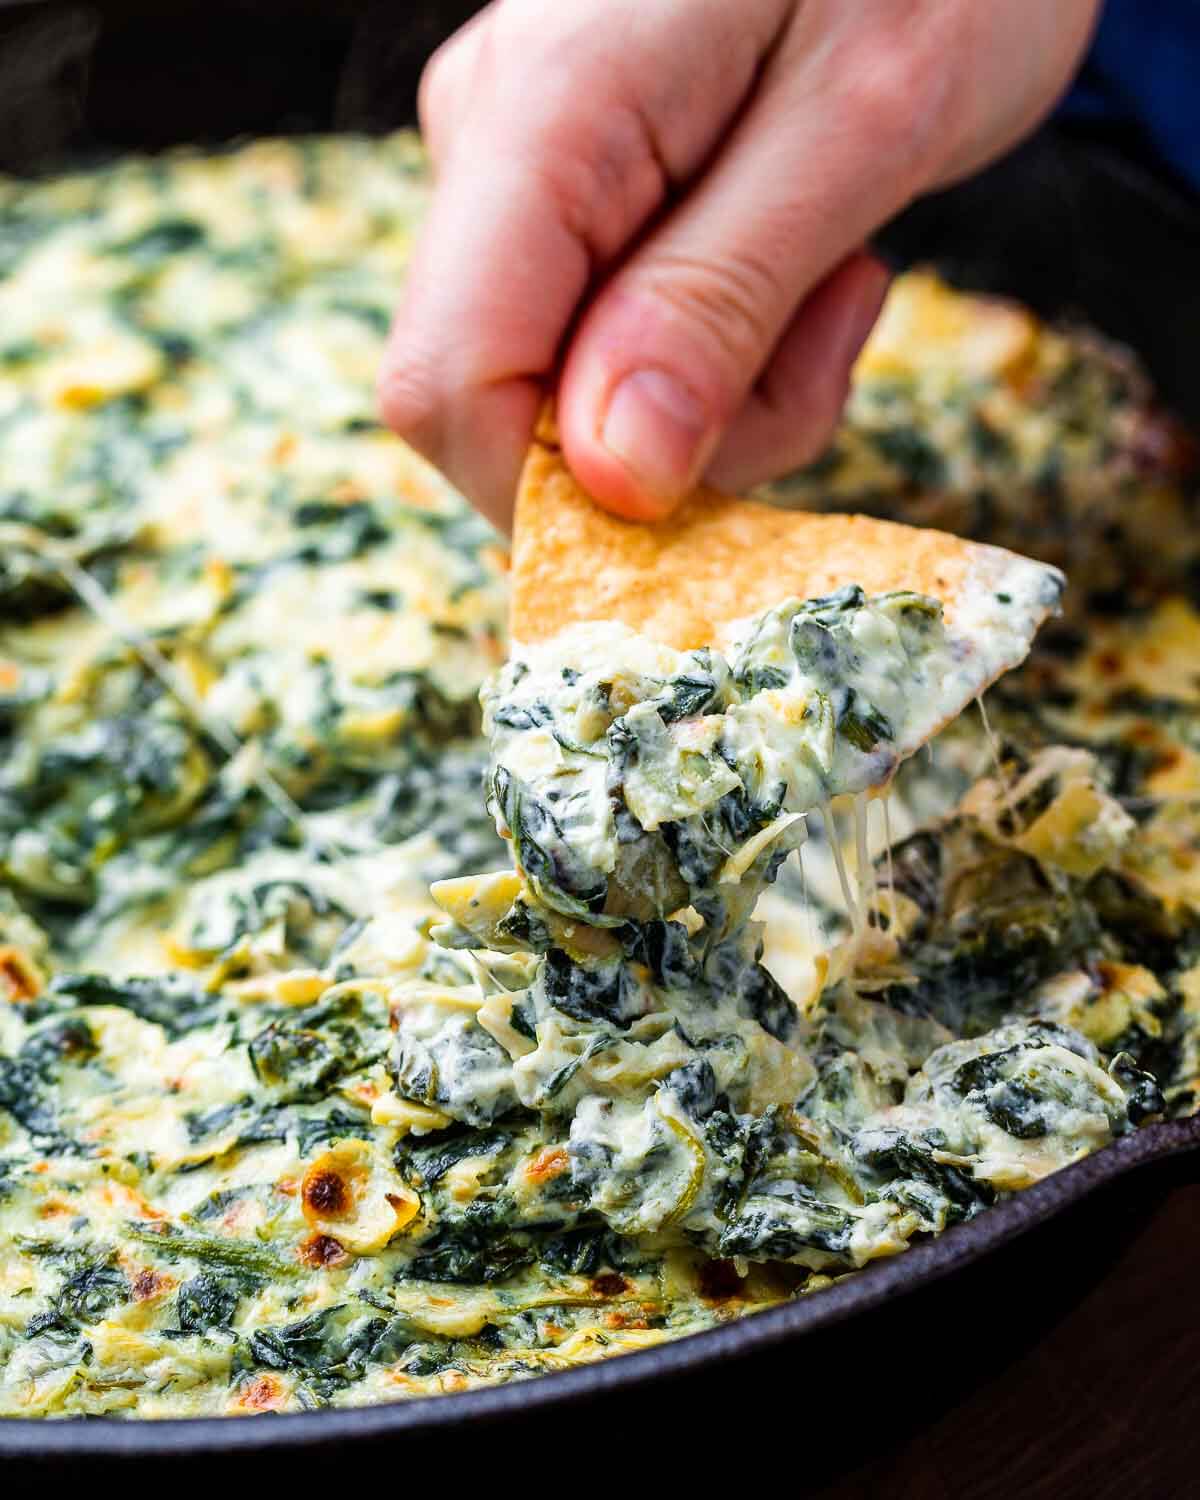 Hand holding tortilla chip with spinach artichoke dip.